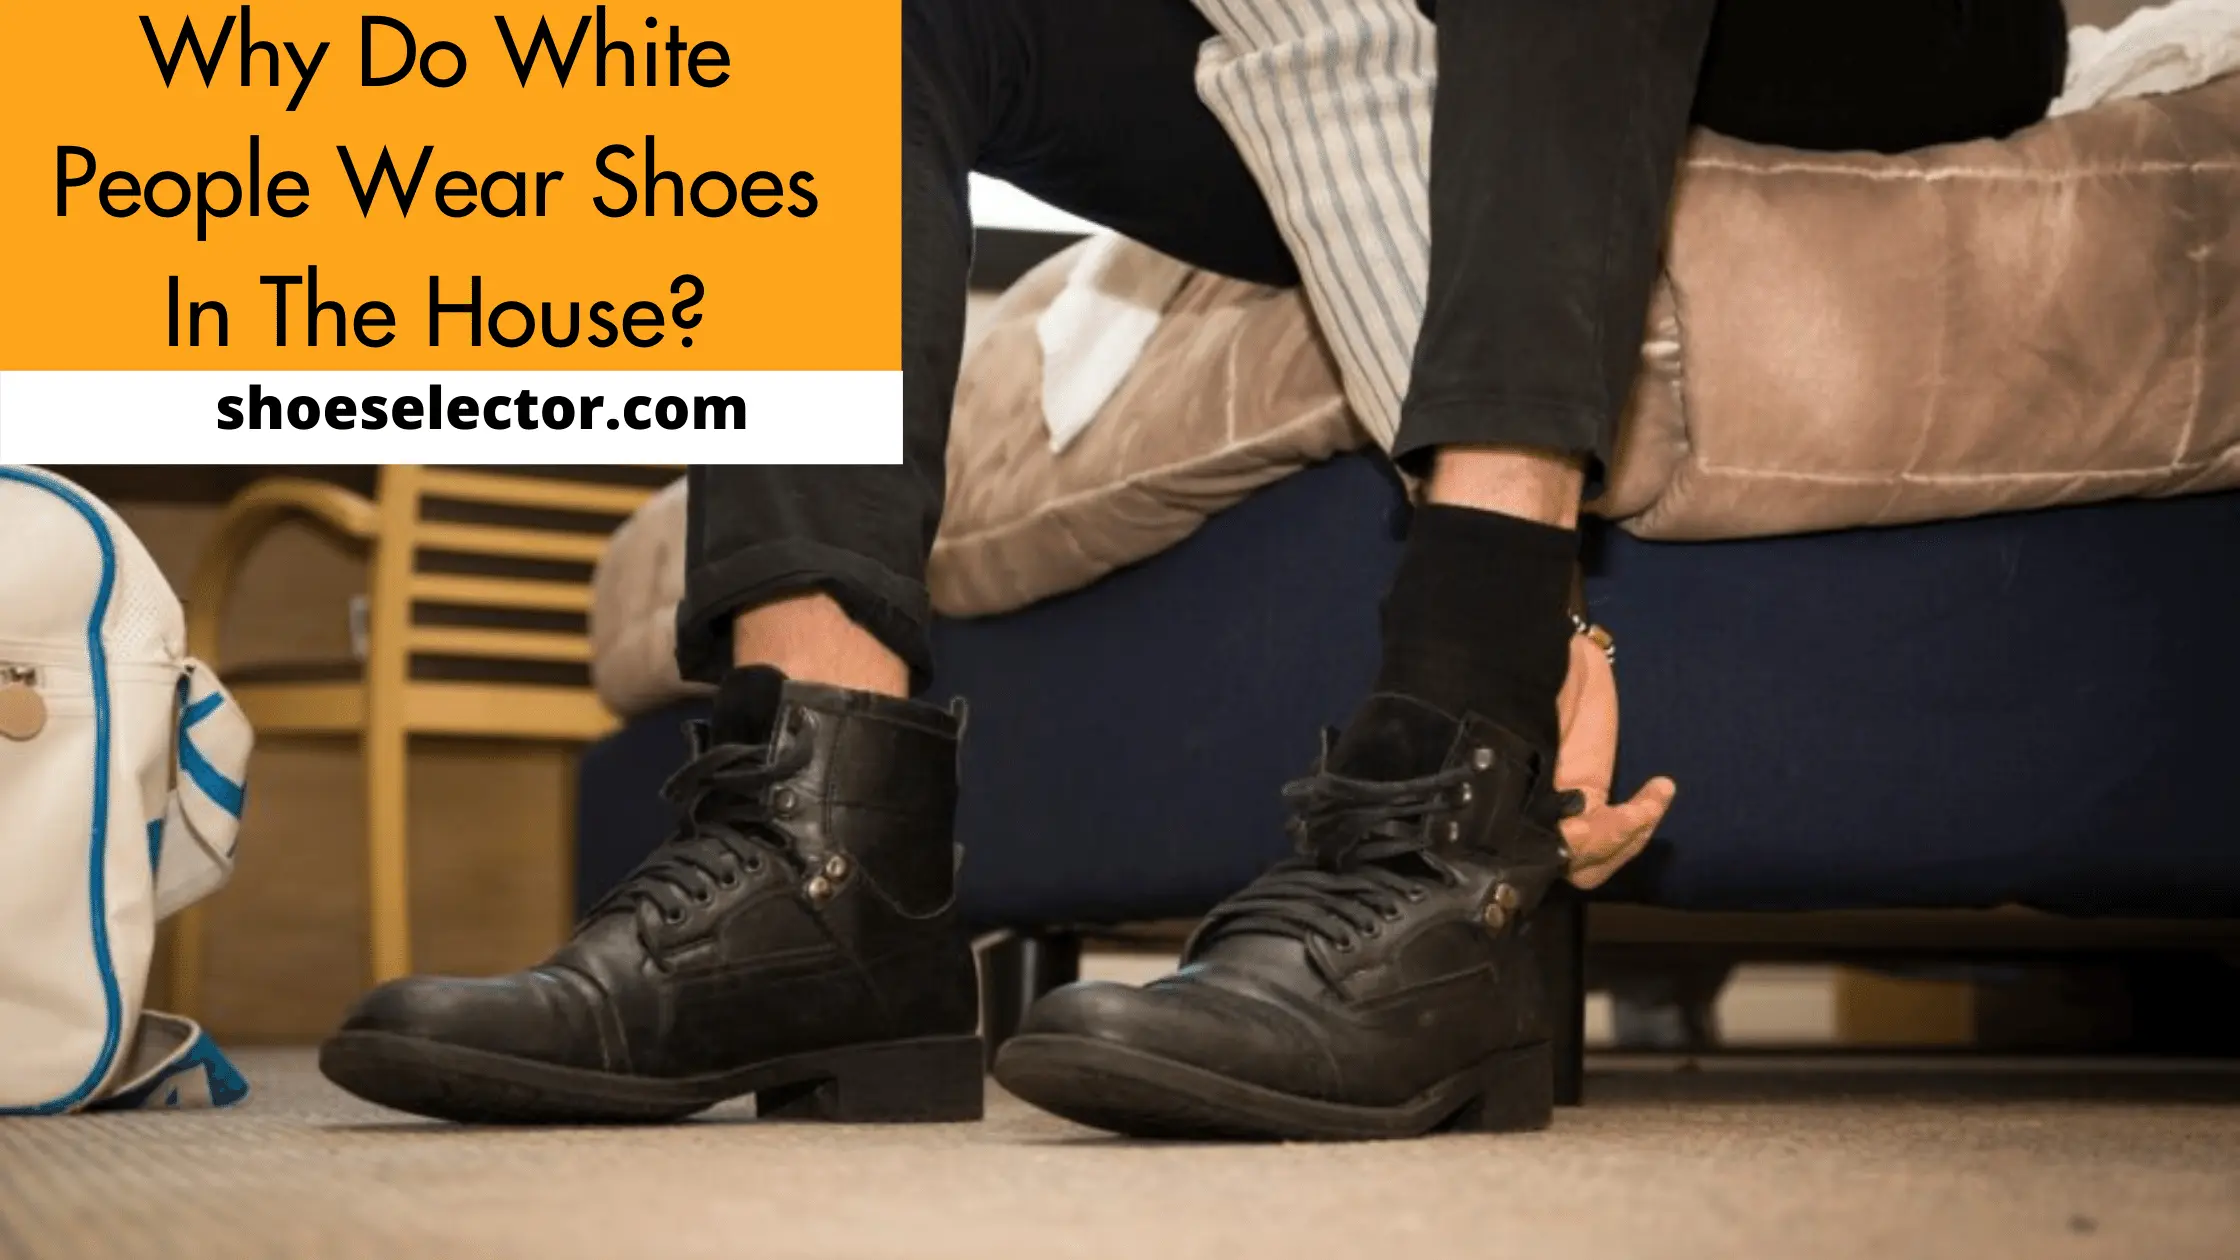 Why Do White People Wear Shoes In The House? - #1 Guide